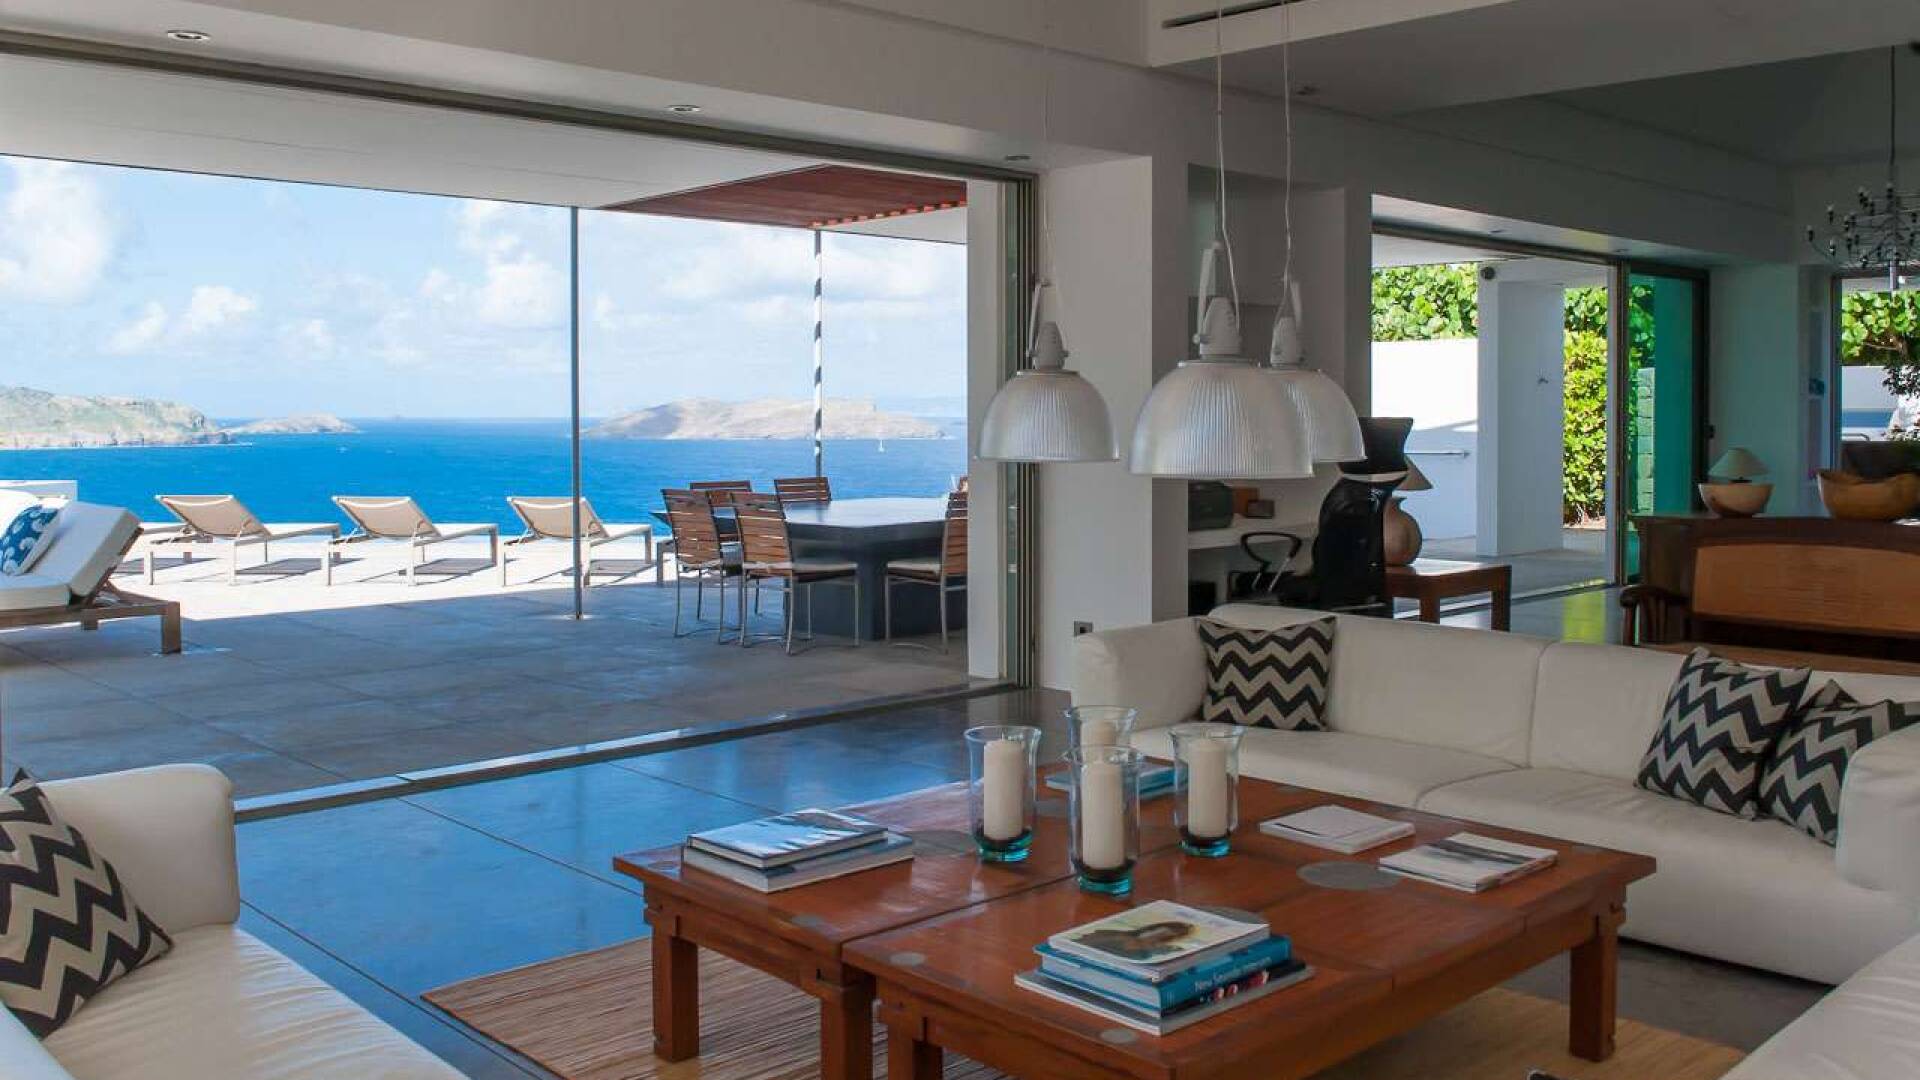 Living Room at WV PYR, Pointe Milou, St. Barthelemy